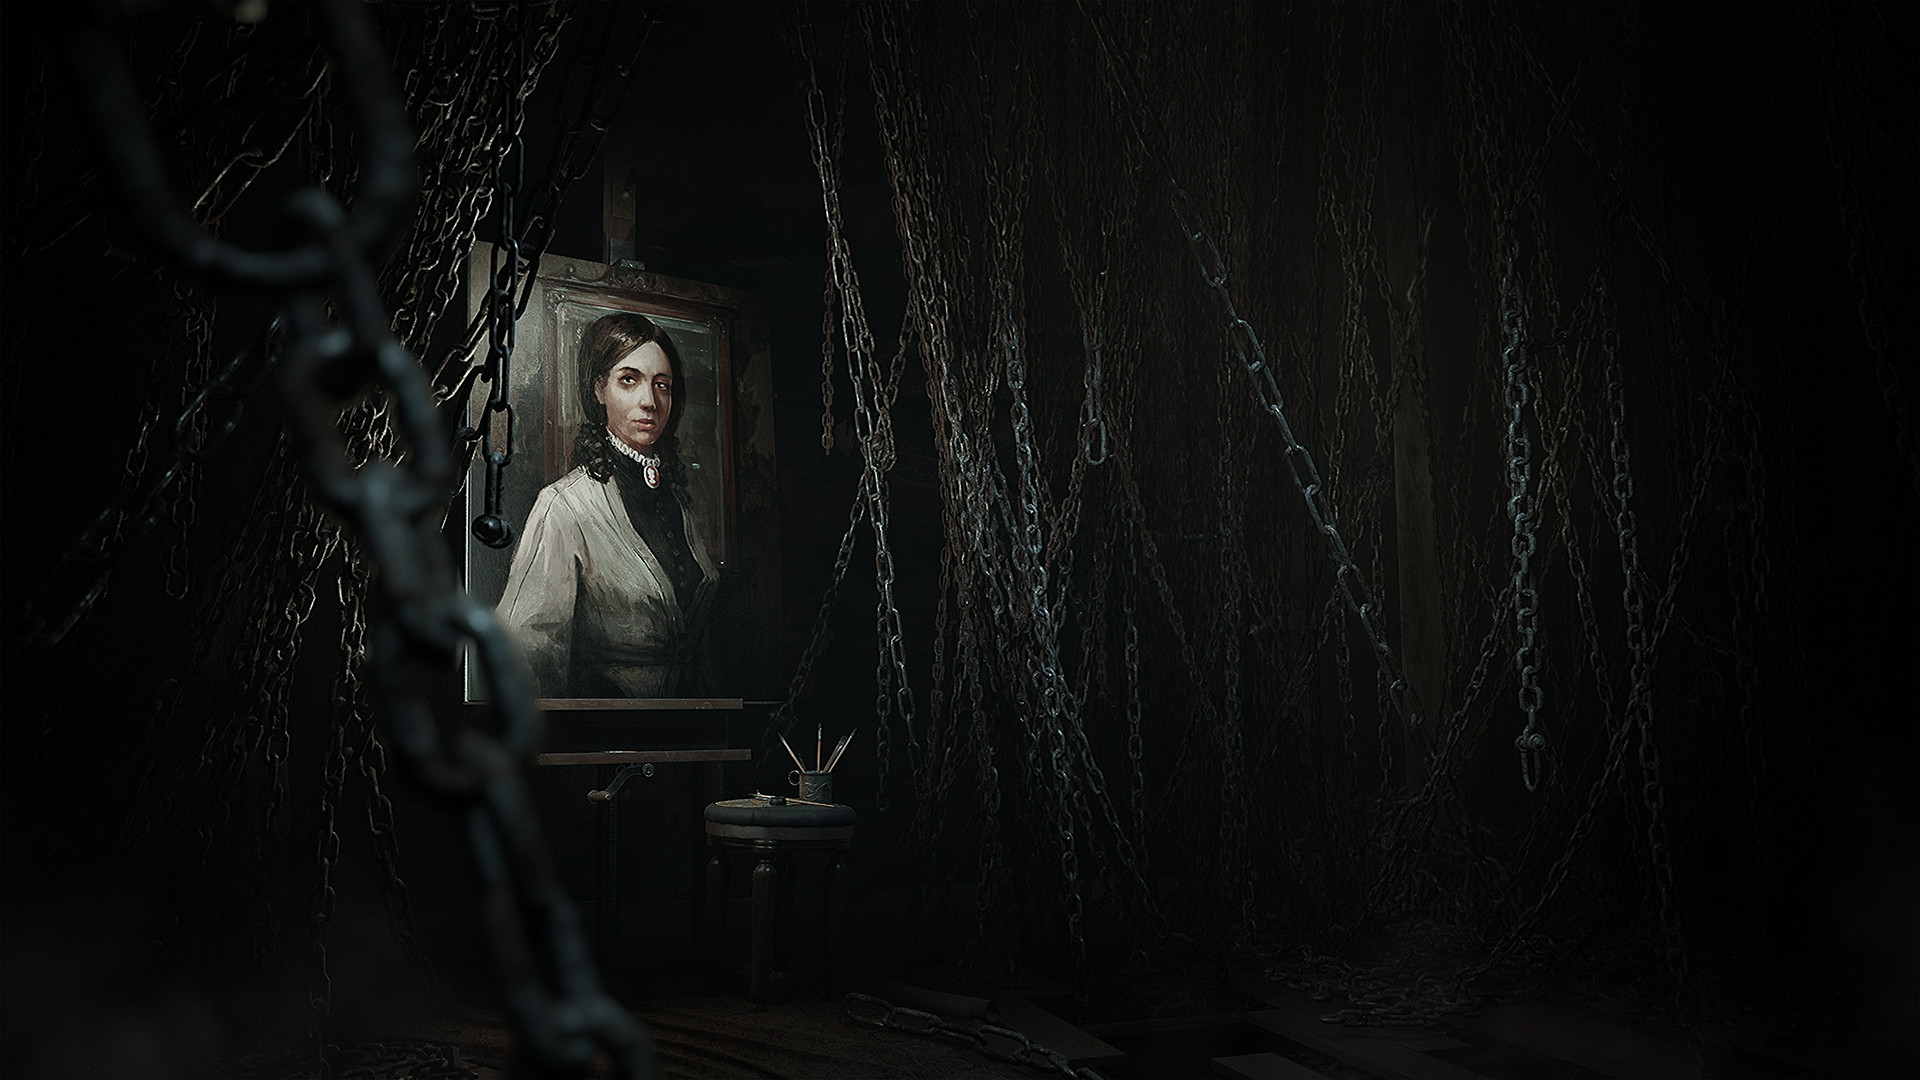 Layers of Fear: Legacy - Metacritic